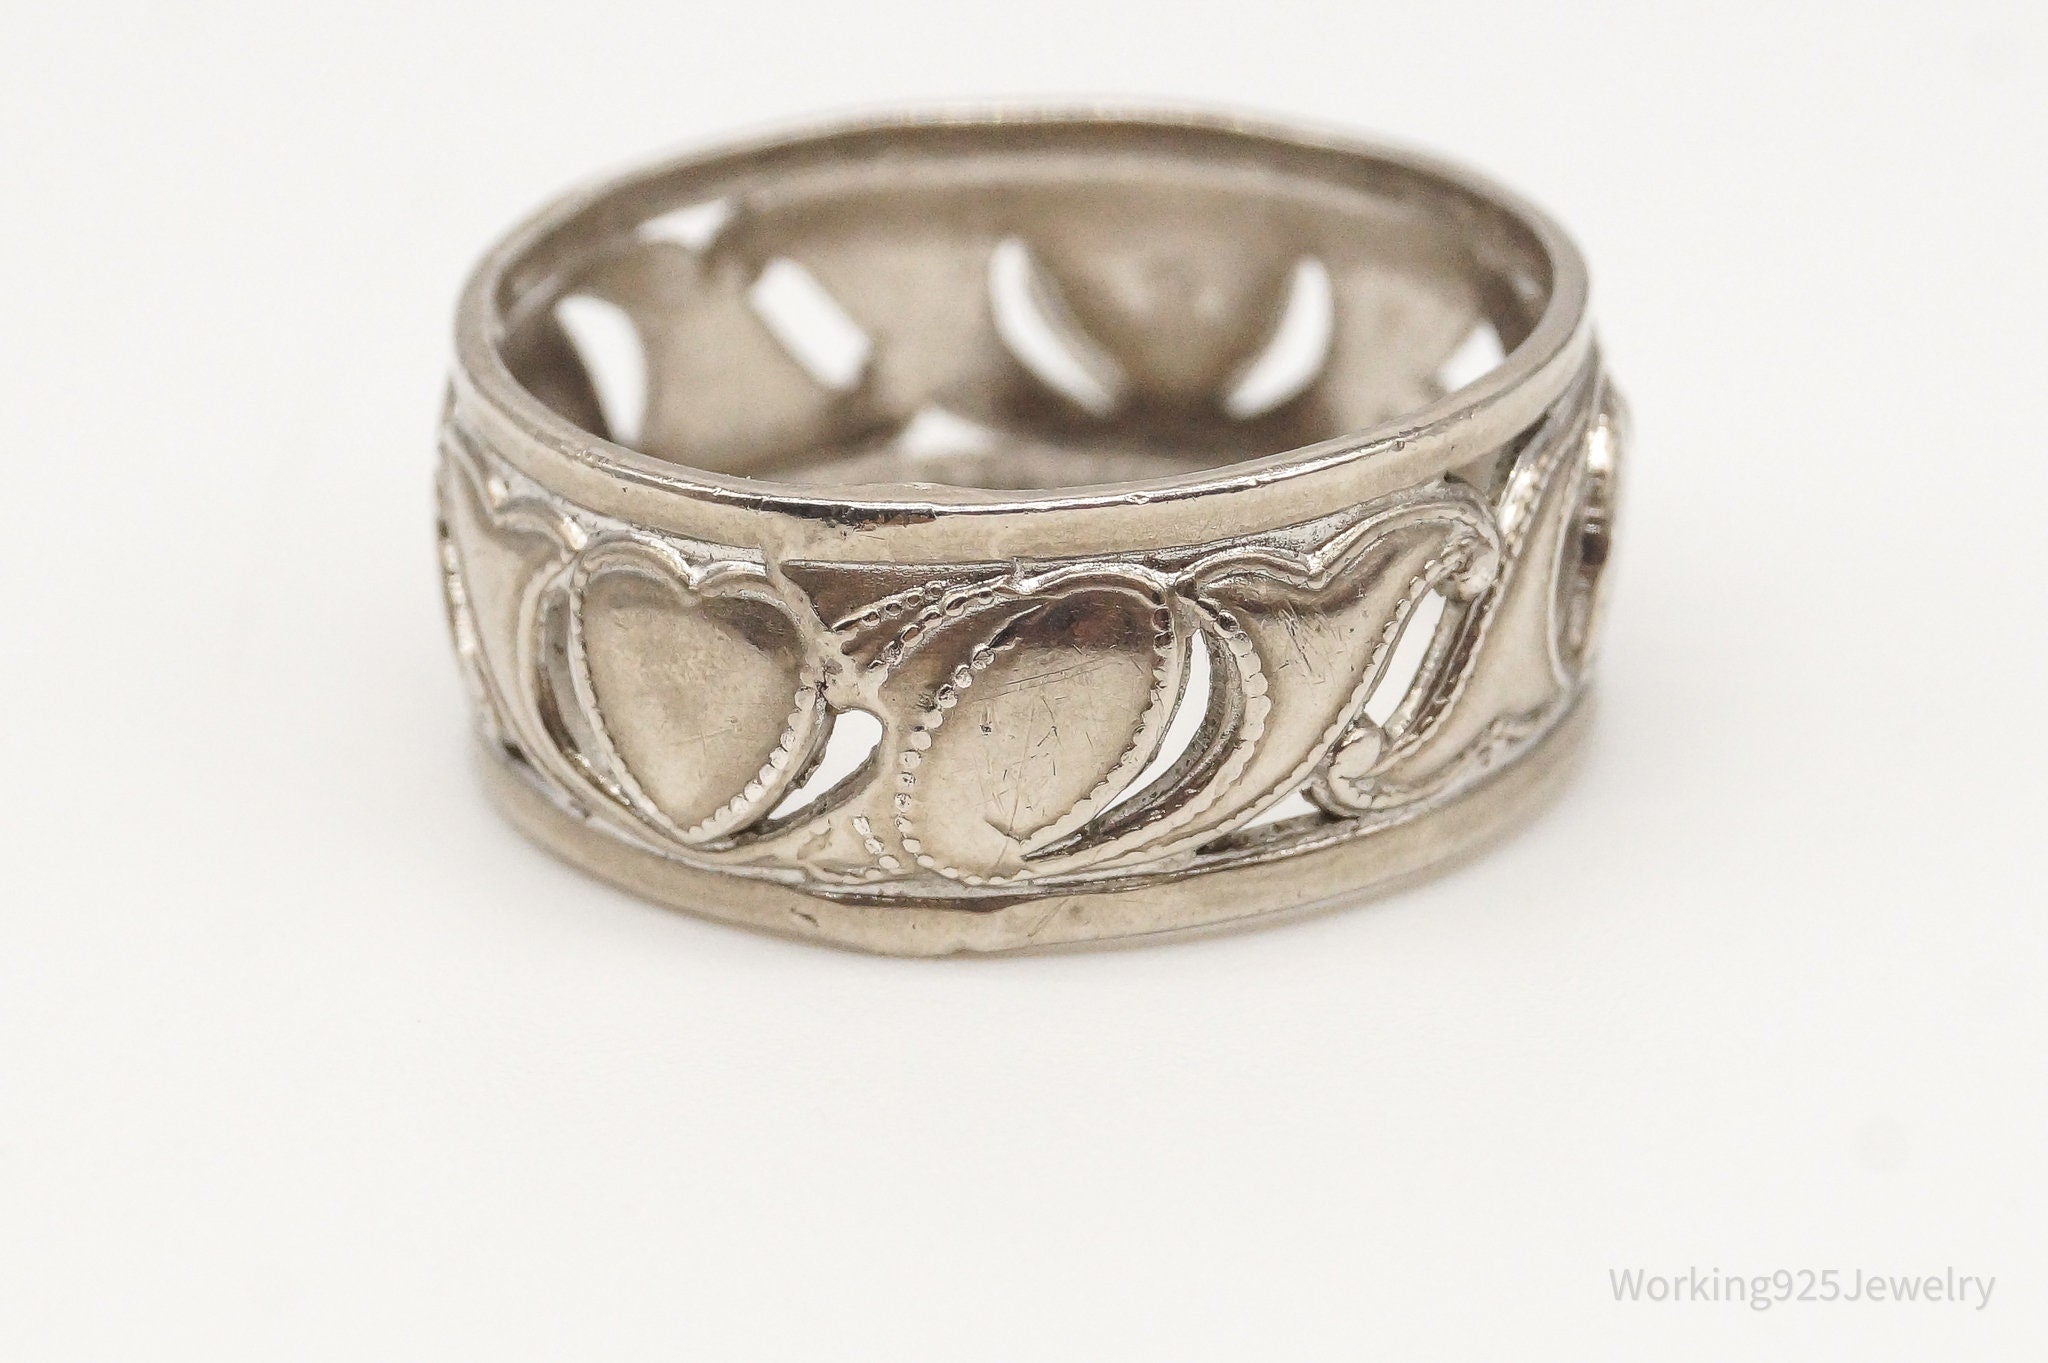 Antique Hearts Sterling Silver Band Ring - Size 6.25